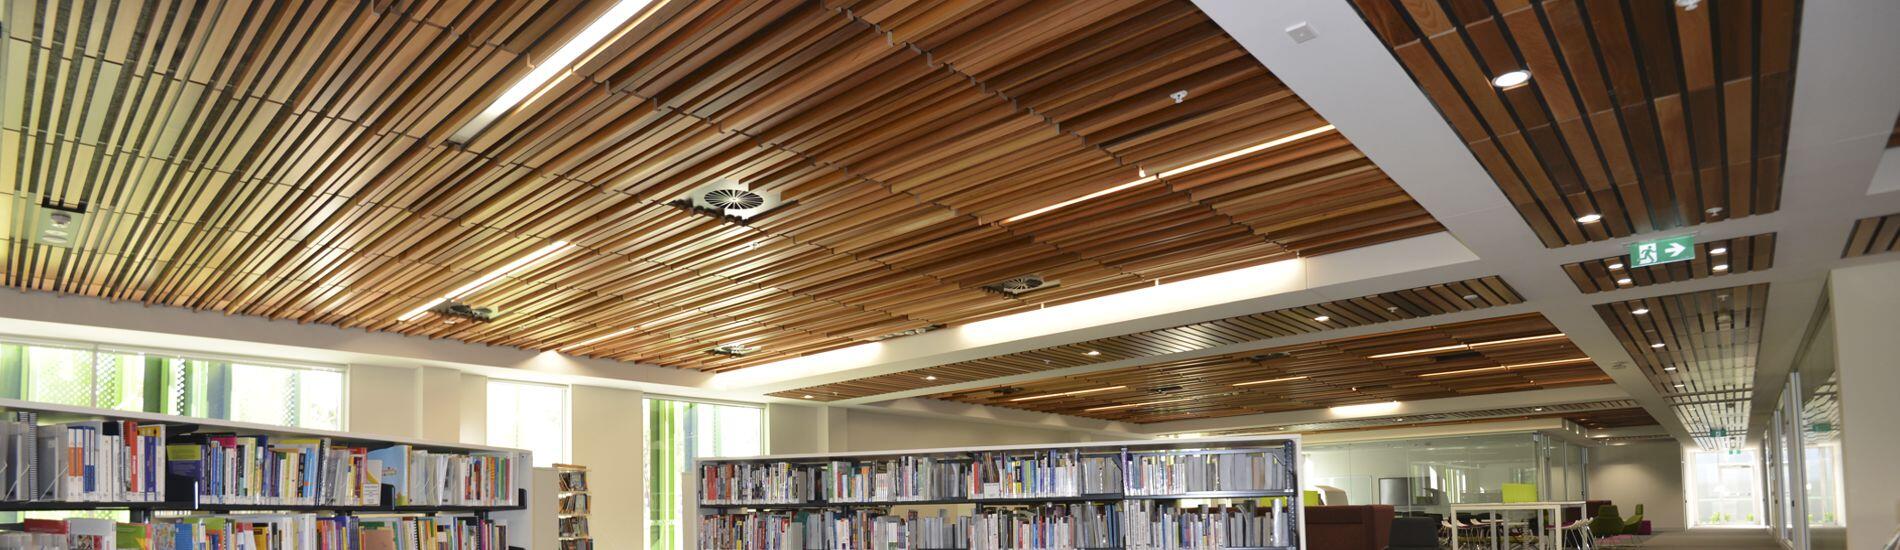 SUPATILE SLAT Timber Ceiling Tiles Provide Acoustic Solution and Aesthetics in Library